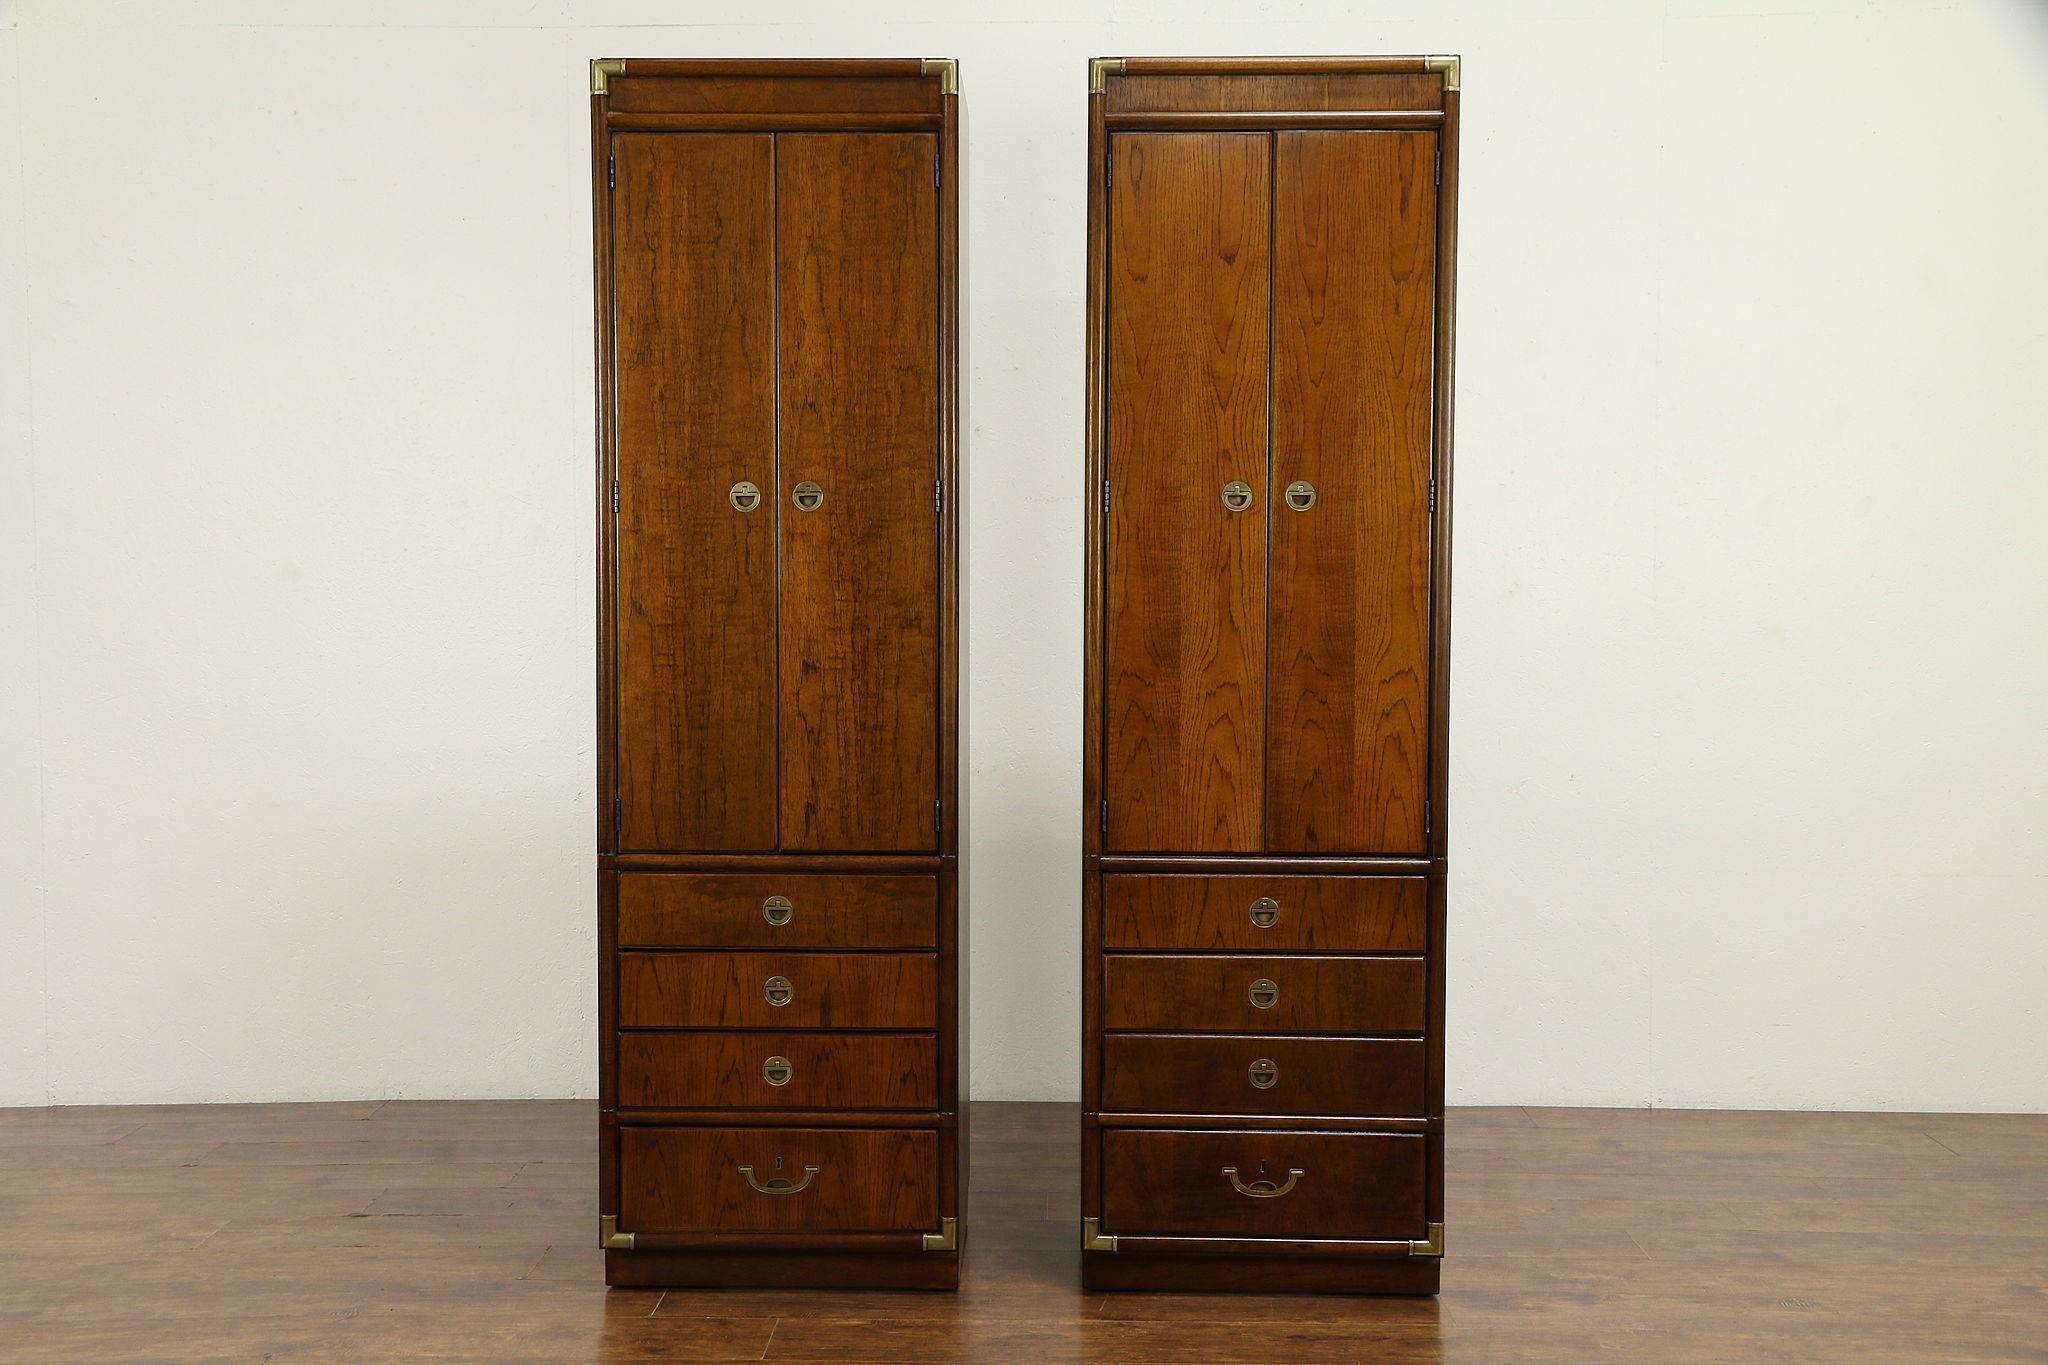 Pair of armoires, wardrobes or closets are in the traditional 